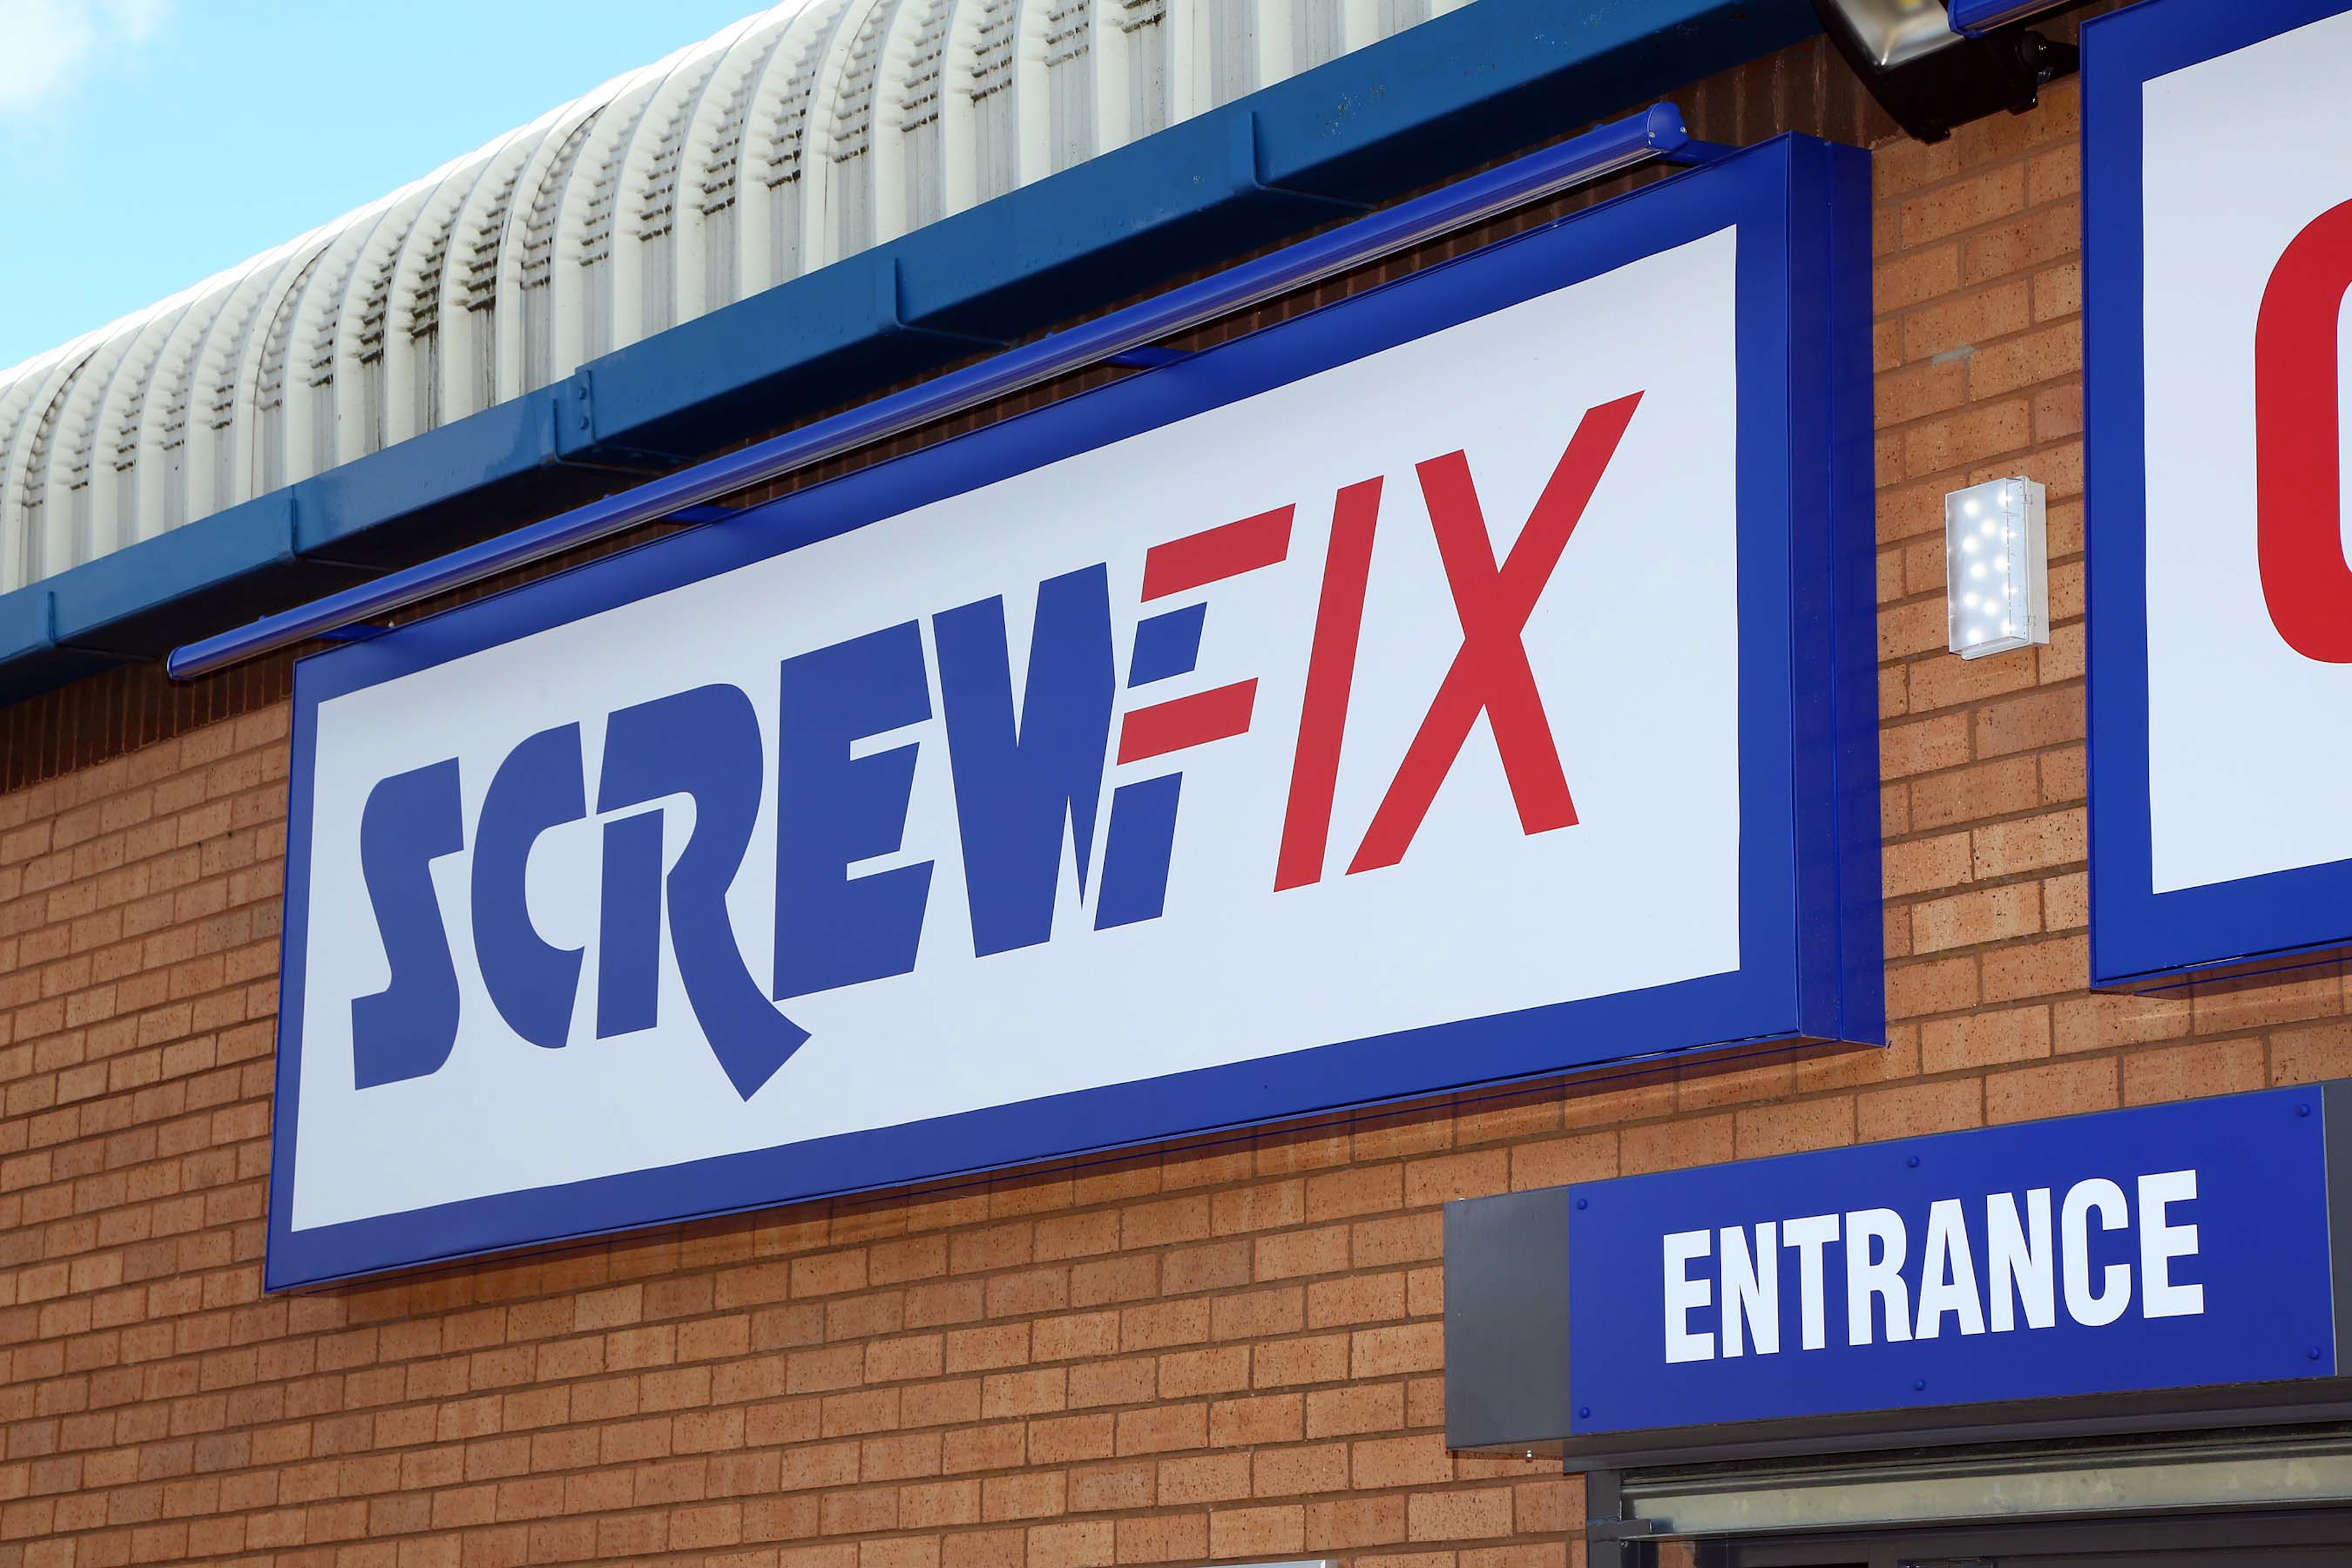 Double the excitement as Screwfix set to open two new stores in North London